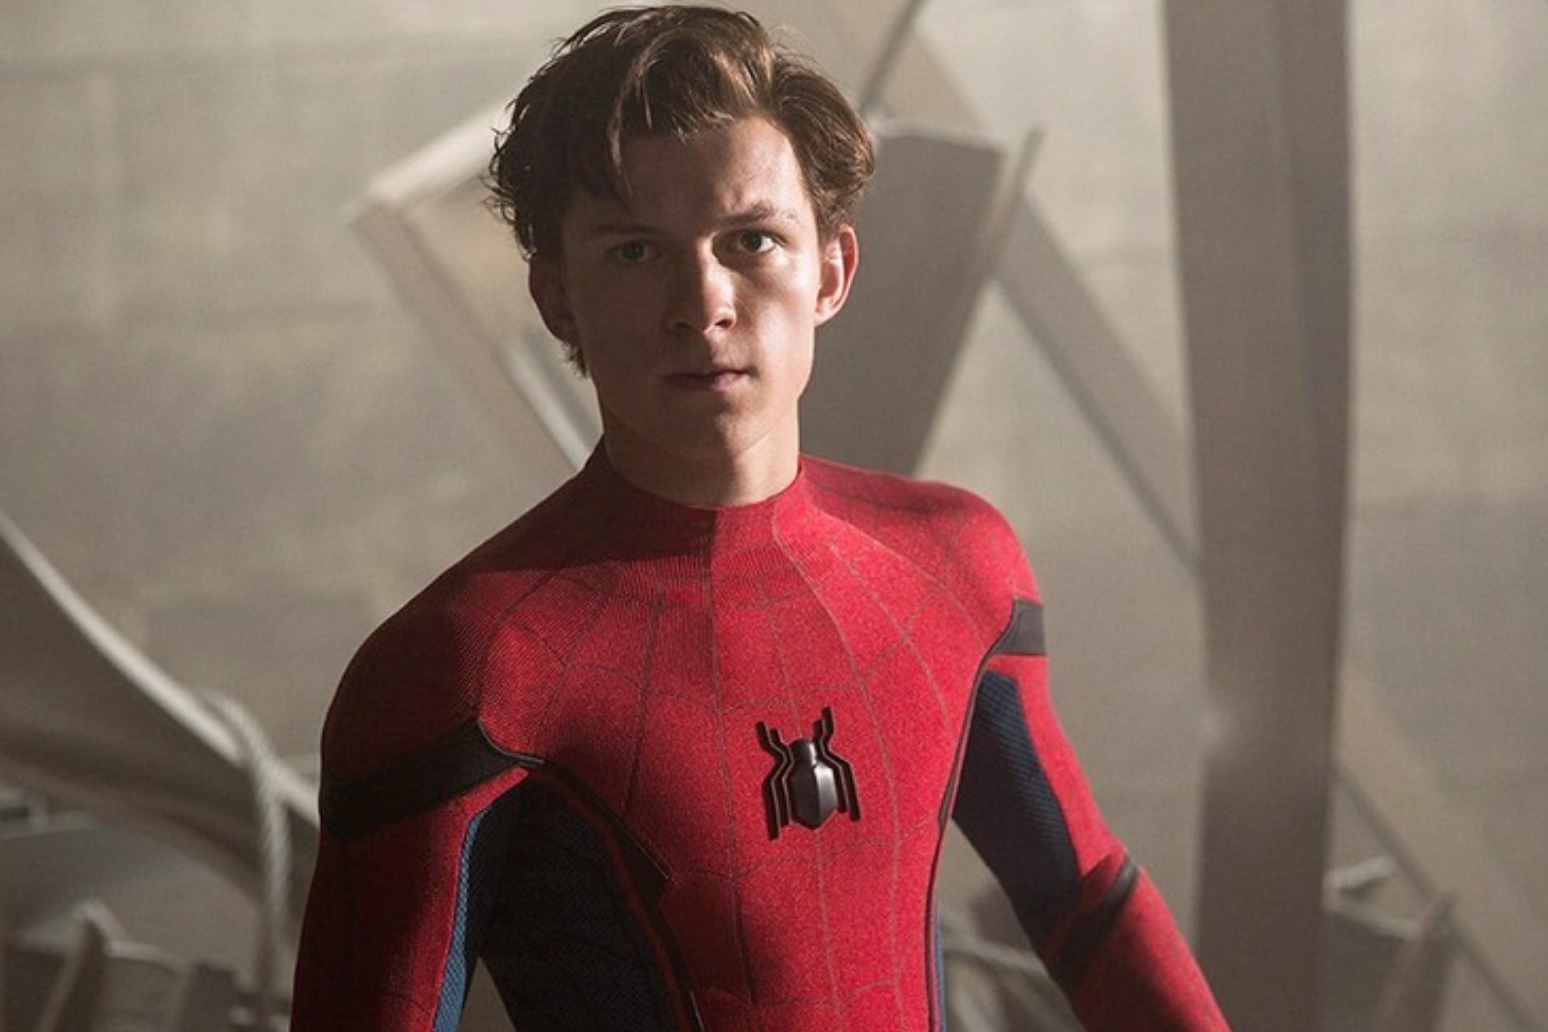 Spider-Man stars tease fans with multiple titles for upcoming third film 